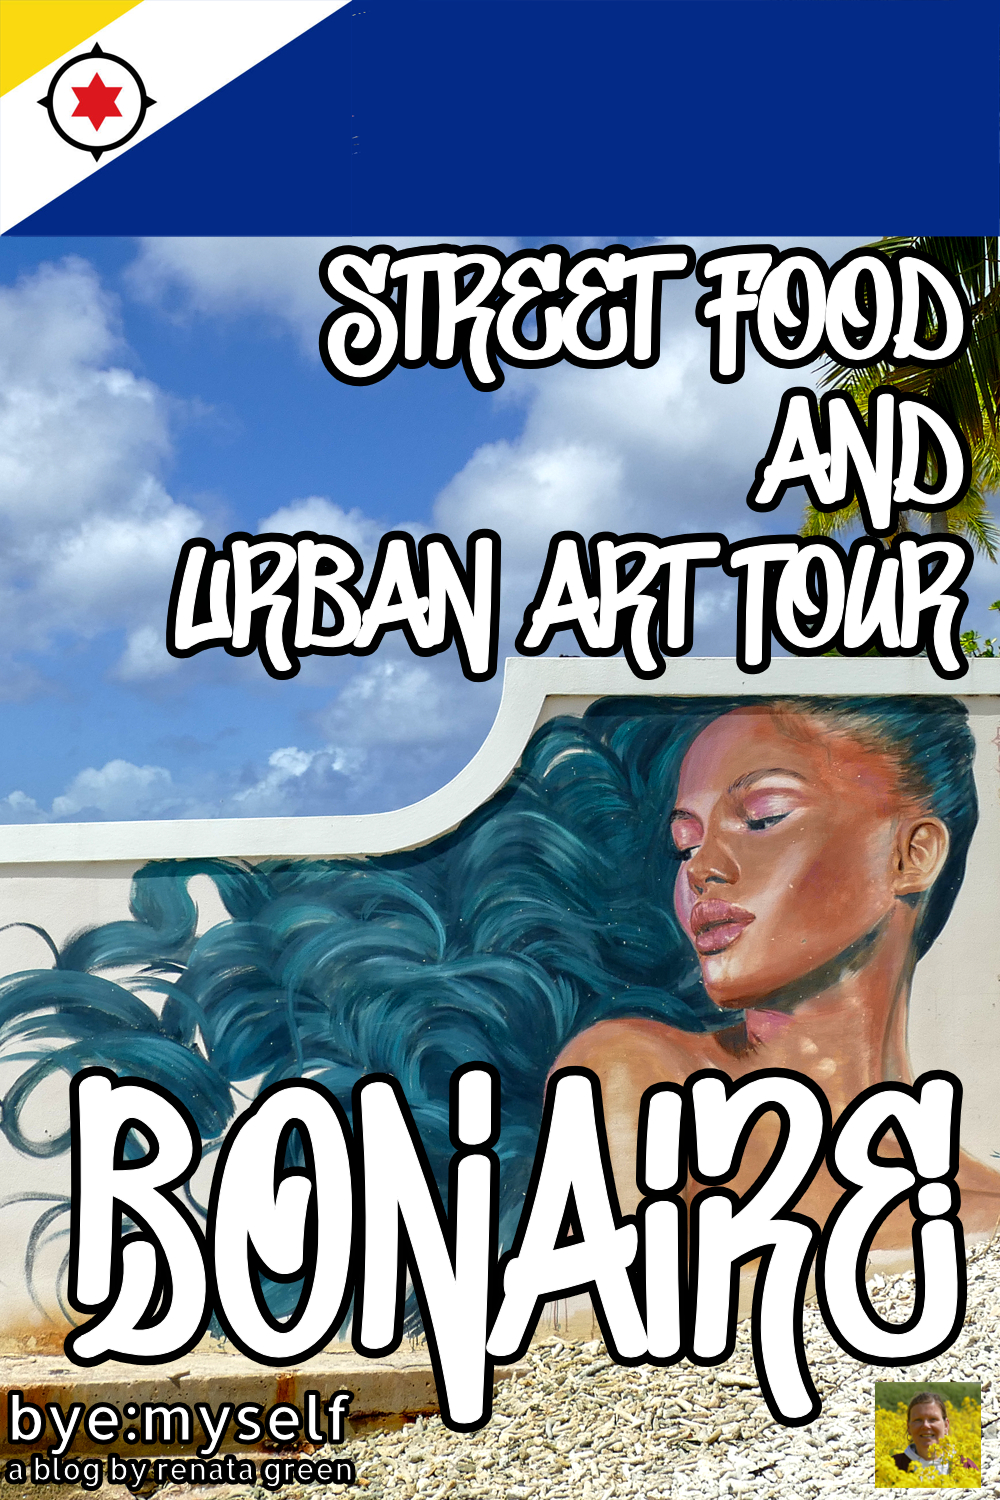 Come out of the water, dry yourself off, and let's explore what Bonaire has to offer when it comes to street food and urban art. I promise you won't regret it! #bonaire #island #streetart #food #urbanart #murals #graffiti #caribbean #westindies #antilles #solotravel #byemyself